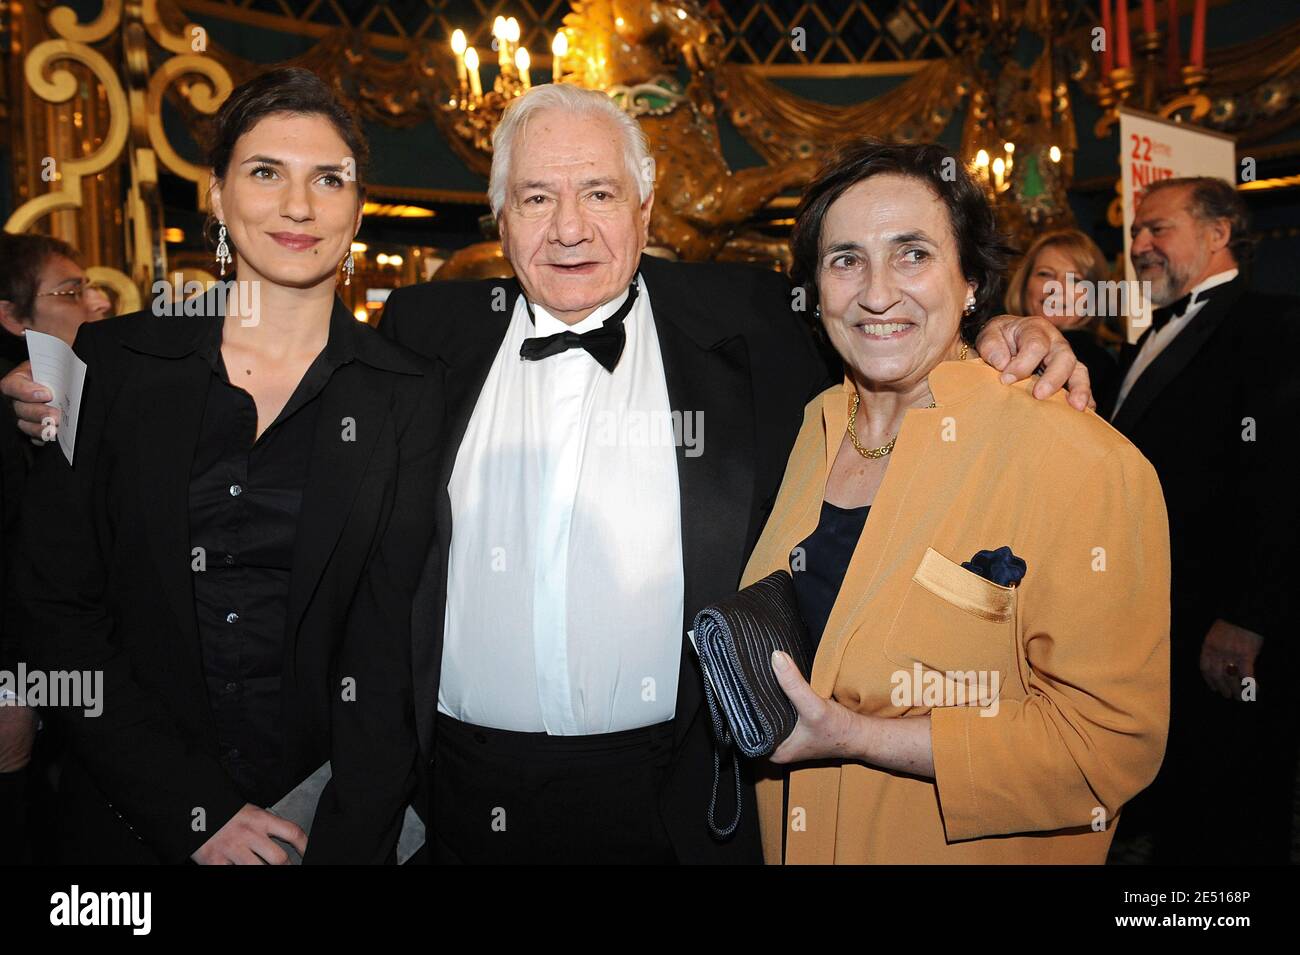 Michel Galabru with wife and daughter attend the 22nd Molieres theatre awards ceremony at the Folies Bergere in Paris, France on April 28, 2008. Photo by Orban-Gouhier/ABACAPRESS.COM Stock Photo